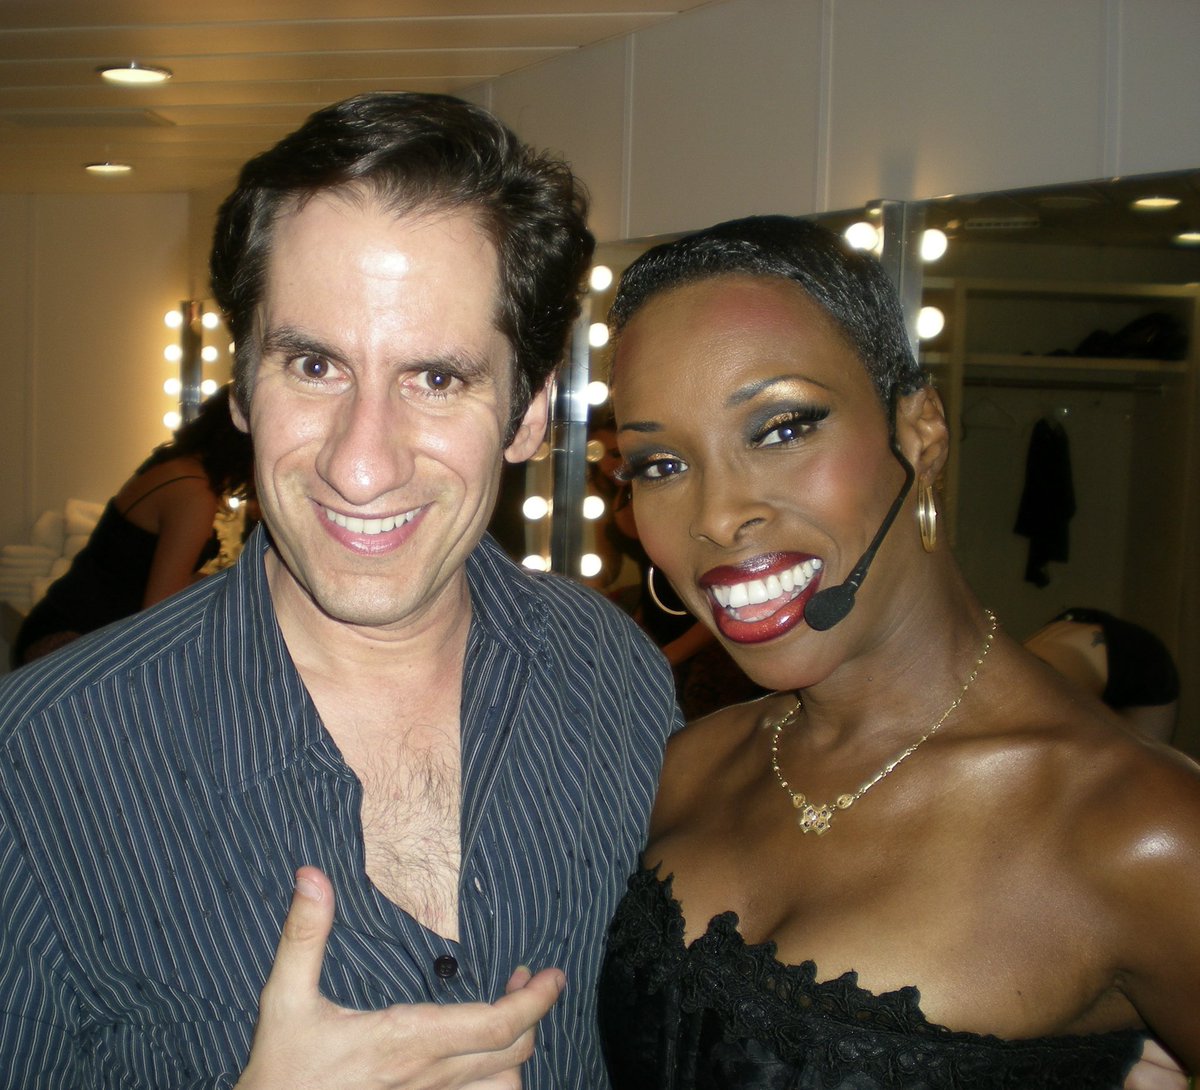 Brenda Braxton and me YEARS ago. She looks THE SAME! I look older but just as shiny/greasy. If u don’t believe me, see us do a show with my amazing husband James Wesley, Tuesday nite at 54 Below! Tix: 54below.org/events/brenda-…